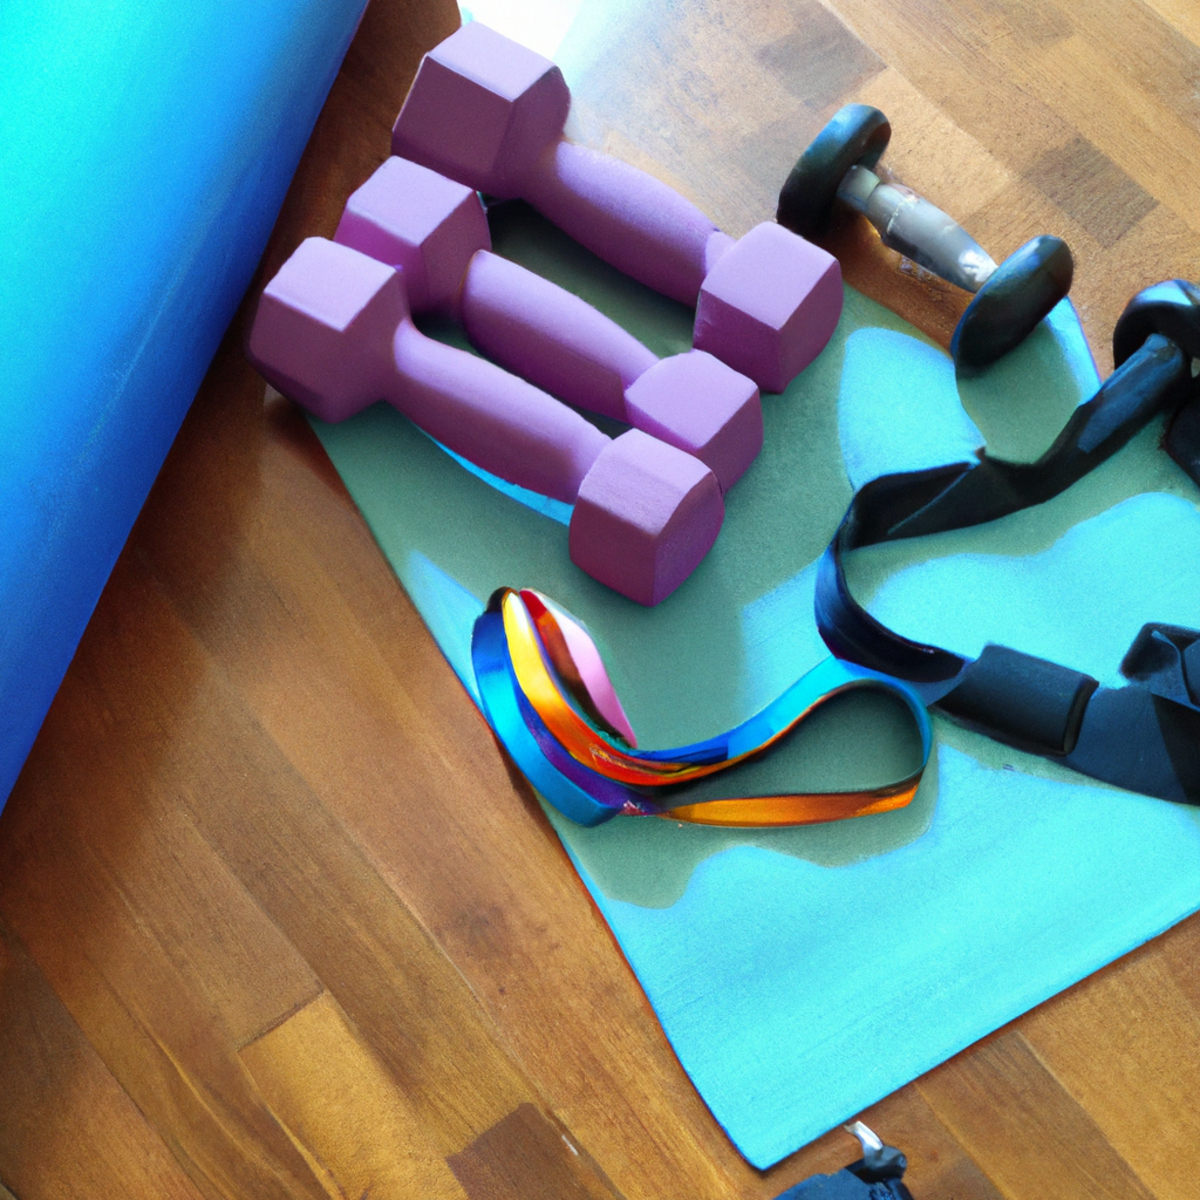 The photo captures a set of dumbbells, a yoga mat, and a resistance band arranged neatly on a hardwood floor. The dumbbells are of different weights, ranging from 5 to 15 pounds, and are placed on either side of the mat. The resistance band is looped around the mat, ready to be used for a variety of exercises. The lighting is bright and natural, highlighting the texture of the wood and the vibrant colors of the equipment. The composition of the photo suggests a sense of order and purpose, inviting the viewer to join in on a challenging at-home workout.